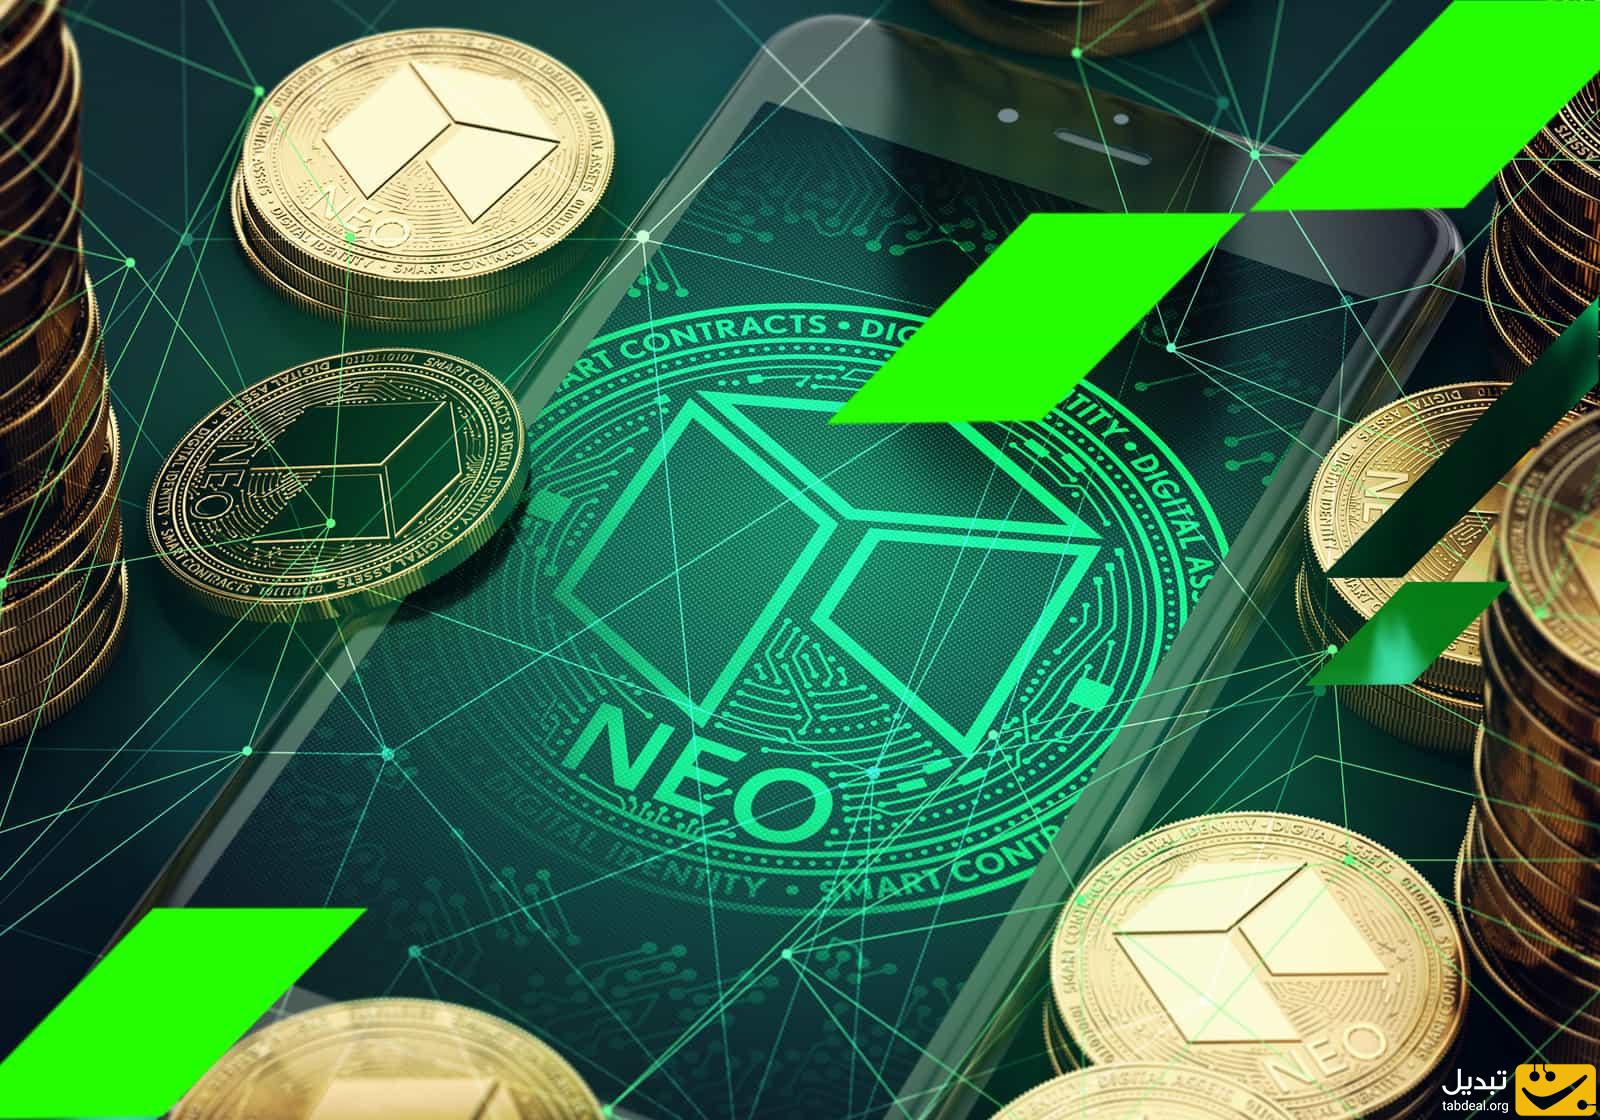 how to buy neo